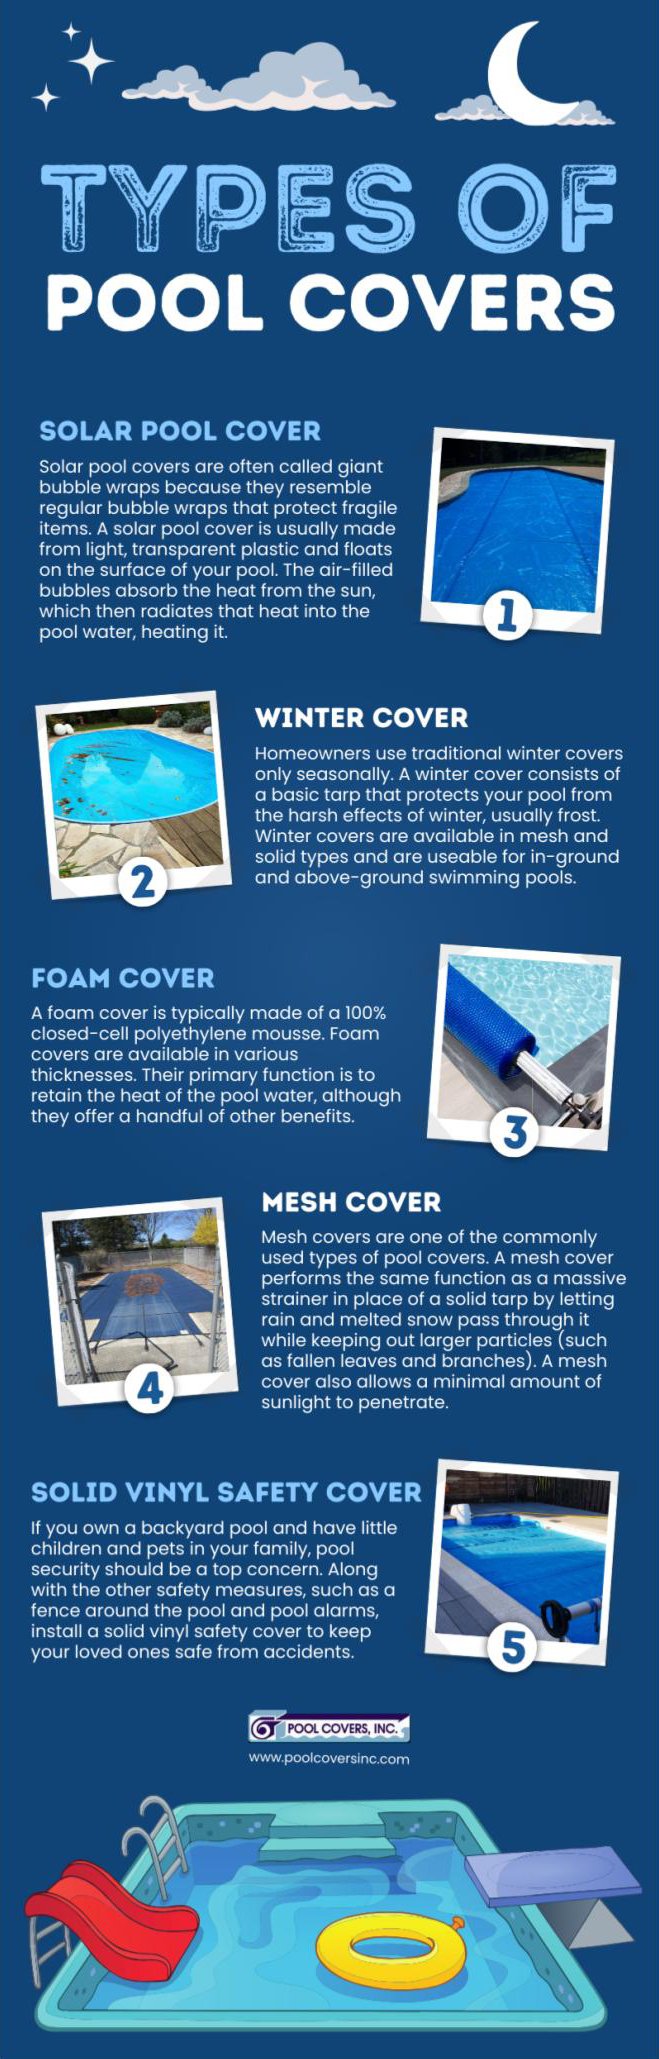 The Benefits of Using a Pool Cover